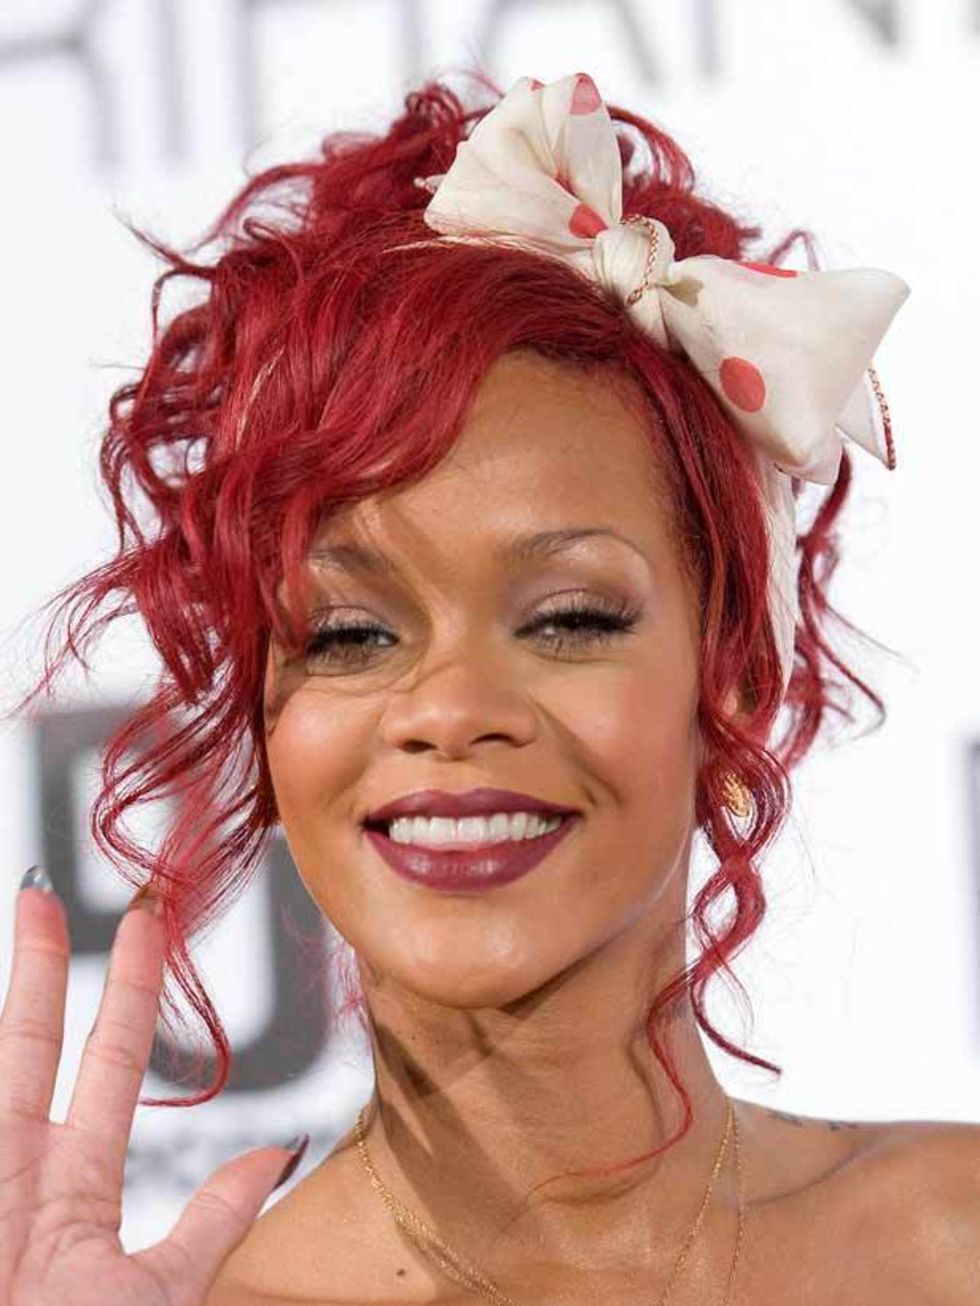 <p><a href="http://www.elleuk.com/beauty/beauty-notes-daily/rihanna-turns-up-the-volume">What do you think of Rihanna's latest hairstyle? Click here to join the debate...</a></p>